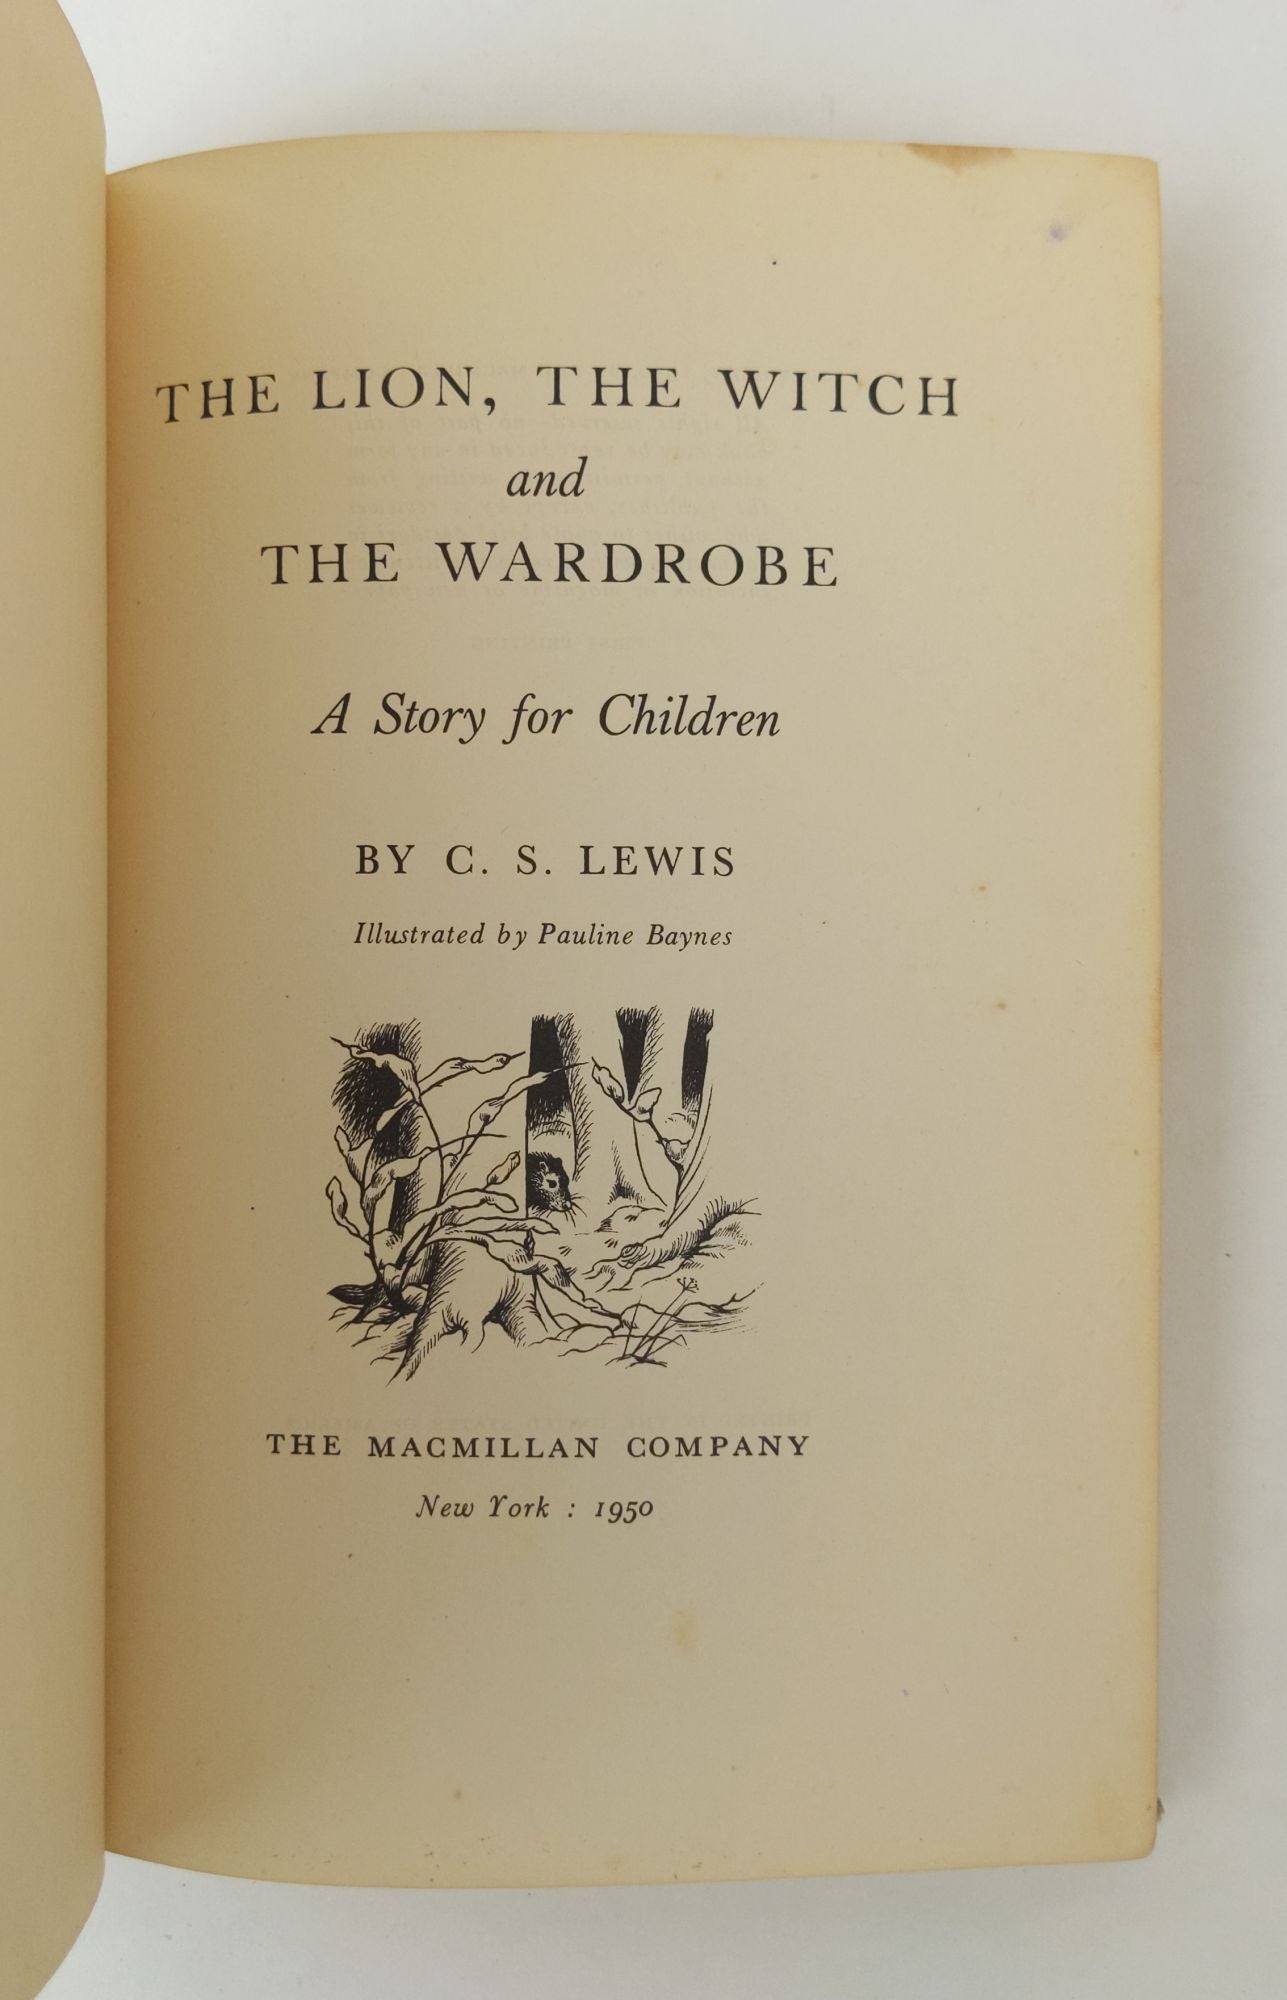 Product Image for THE LION, THE WITCH AND THE WARDROBE